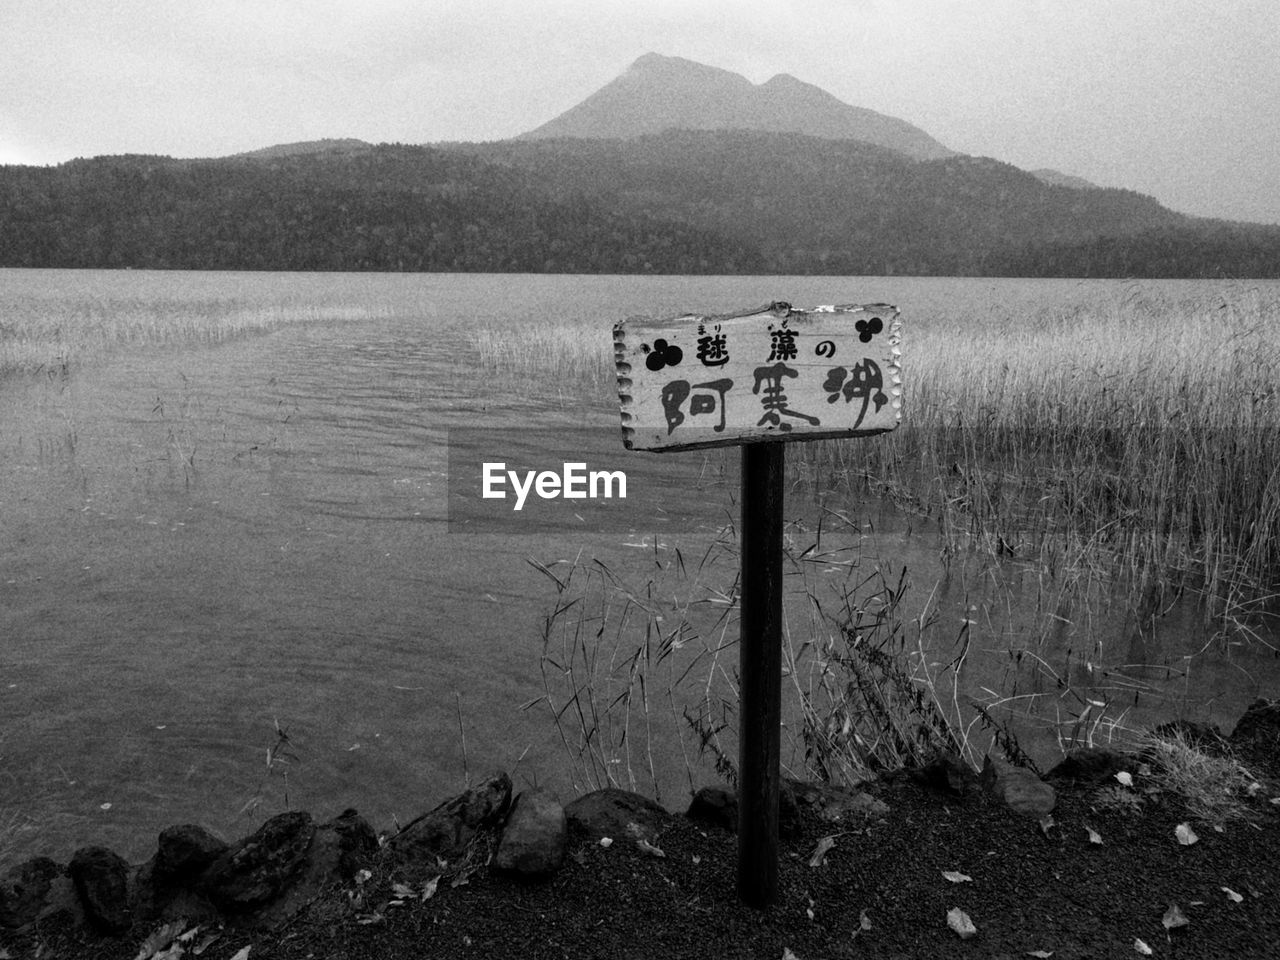 WARNING SIGN ON WOODEN POST IN LAKE